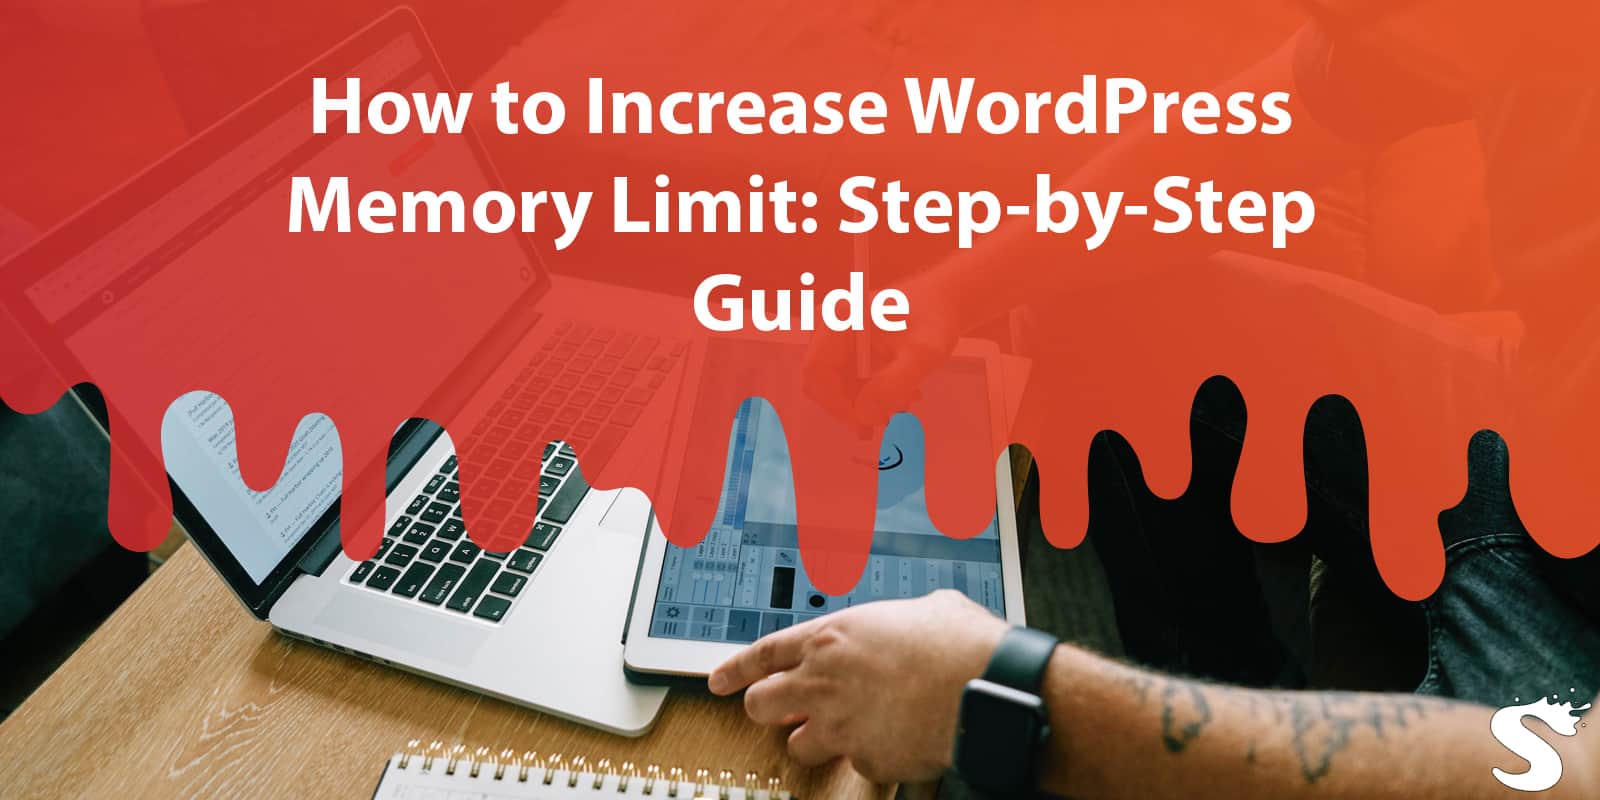 How to Increase WordPress Memory Limit: Step-by-Step Guide